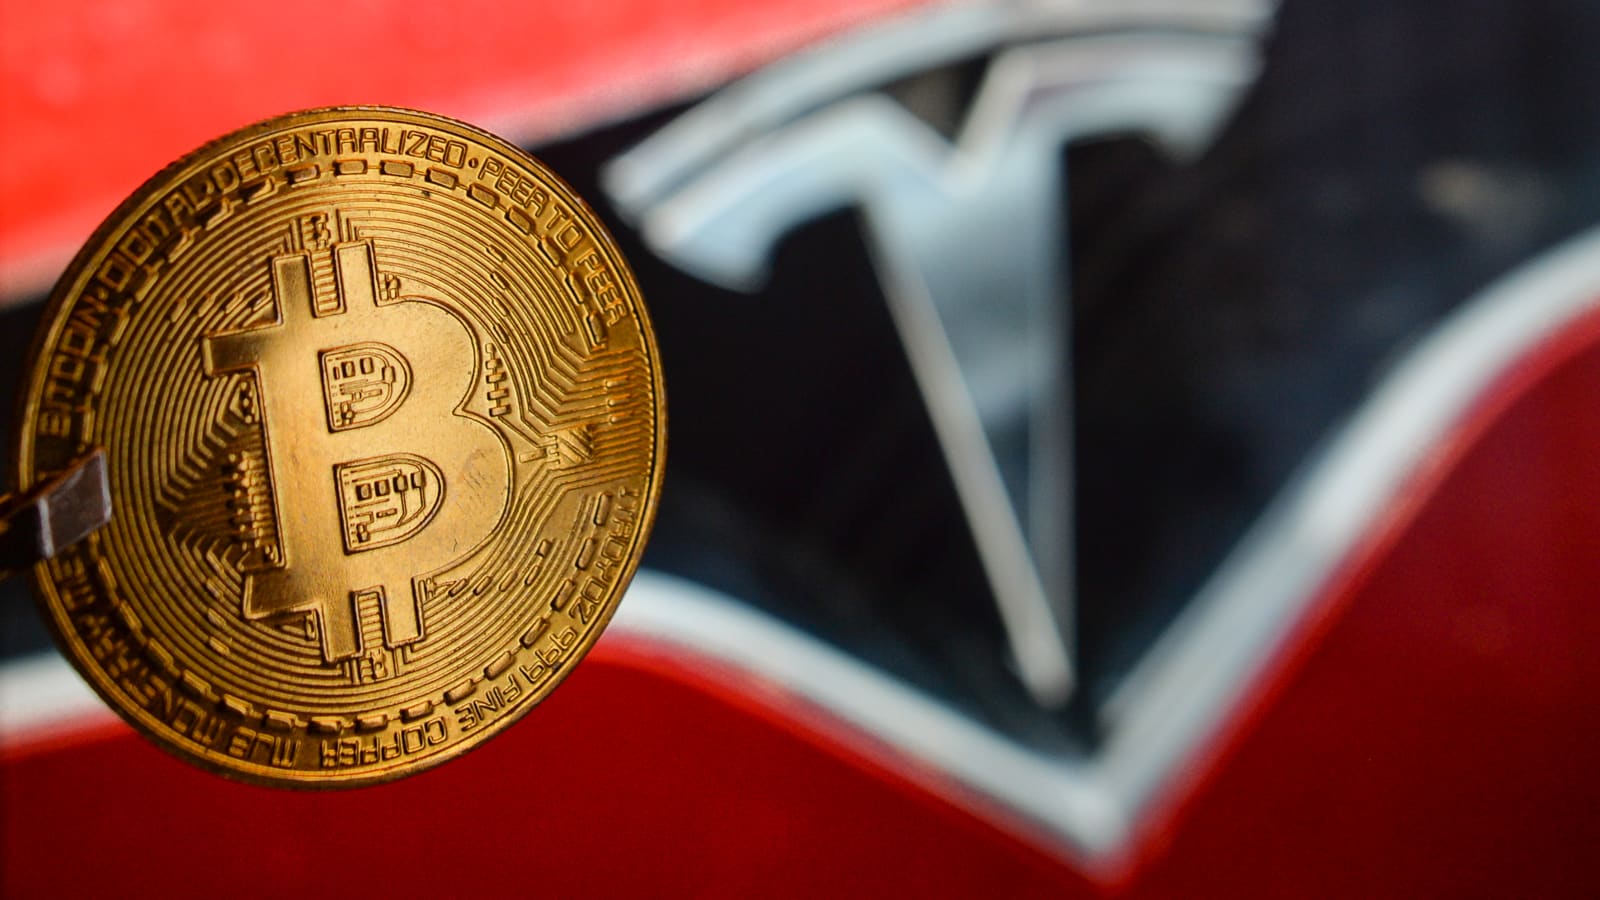 Tesla and bitcoin's value are now linked, analyst says